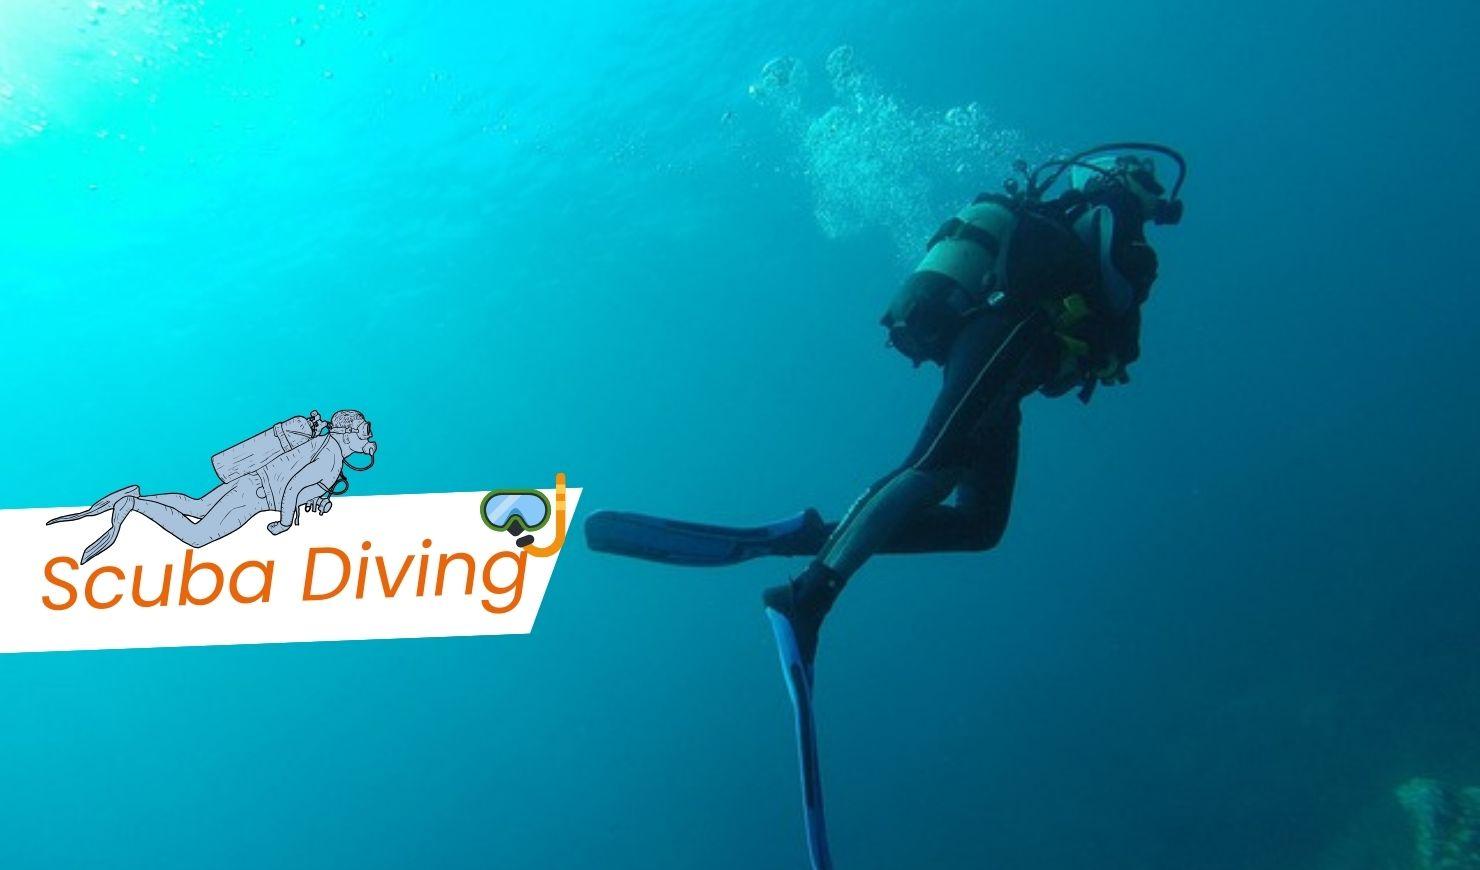 Top 10 Best Scuba Diving in the World: Location, When to Go, Precautions